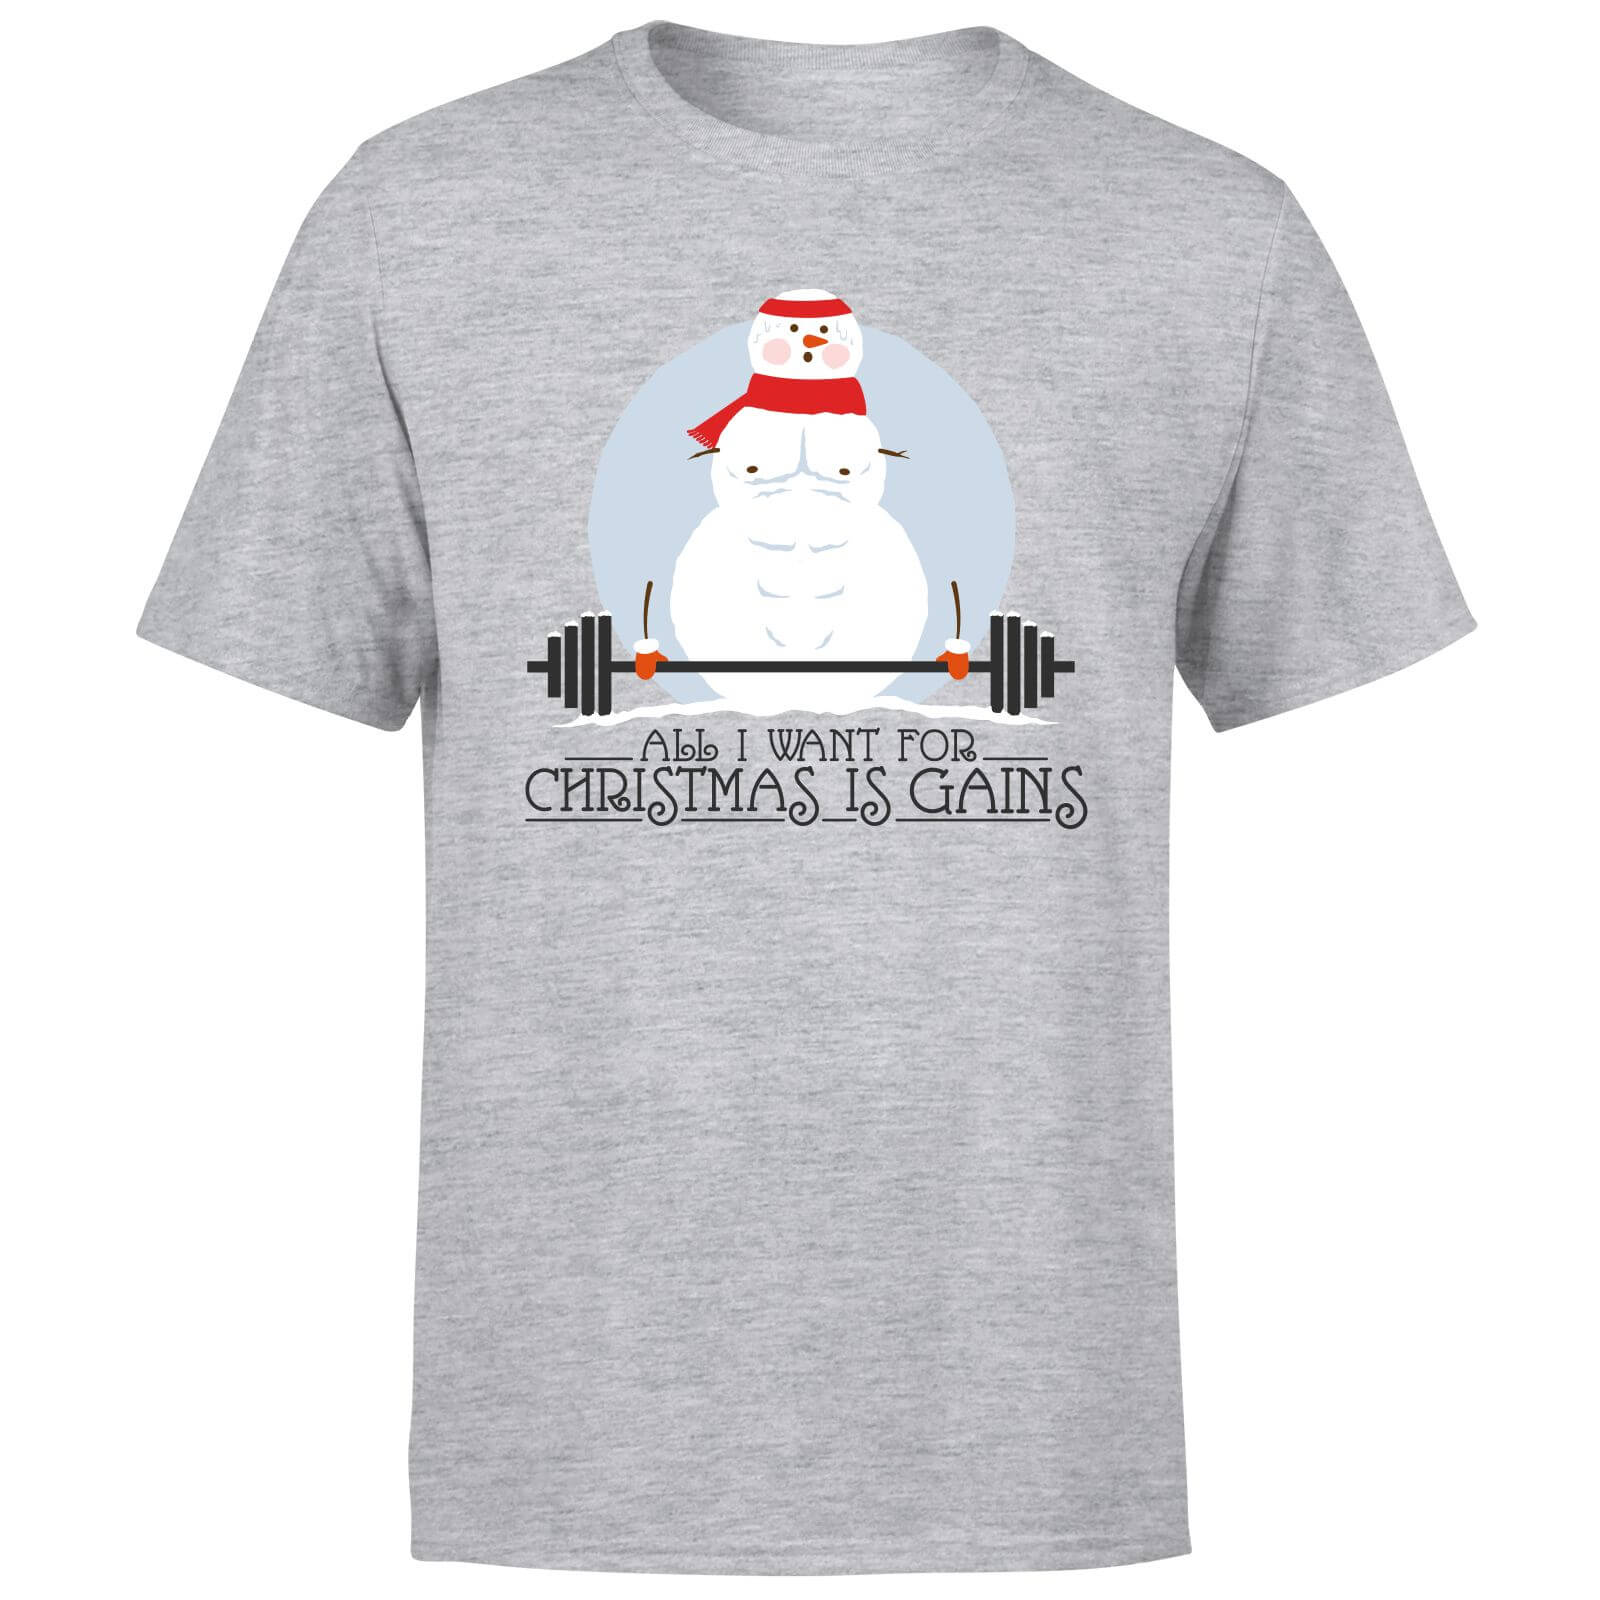 All I Want For Christmas Is Gains T-Shirt - Grey - S